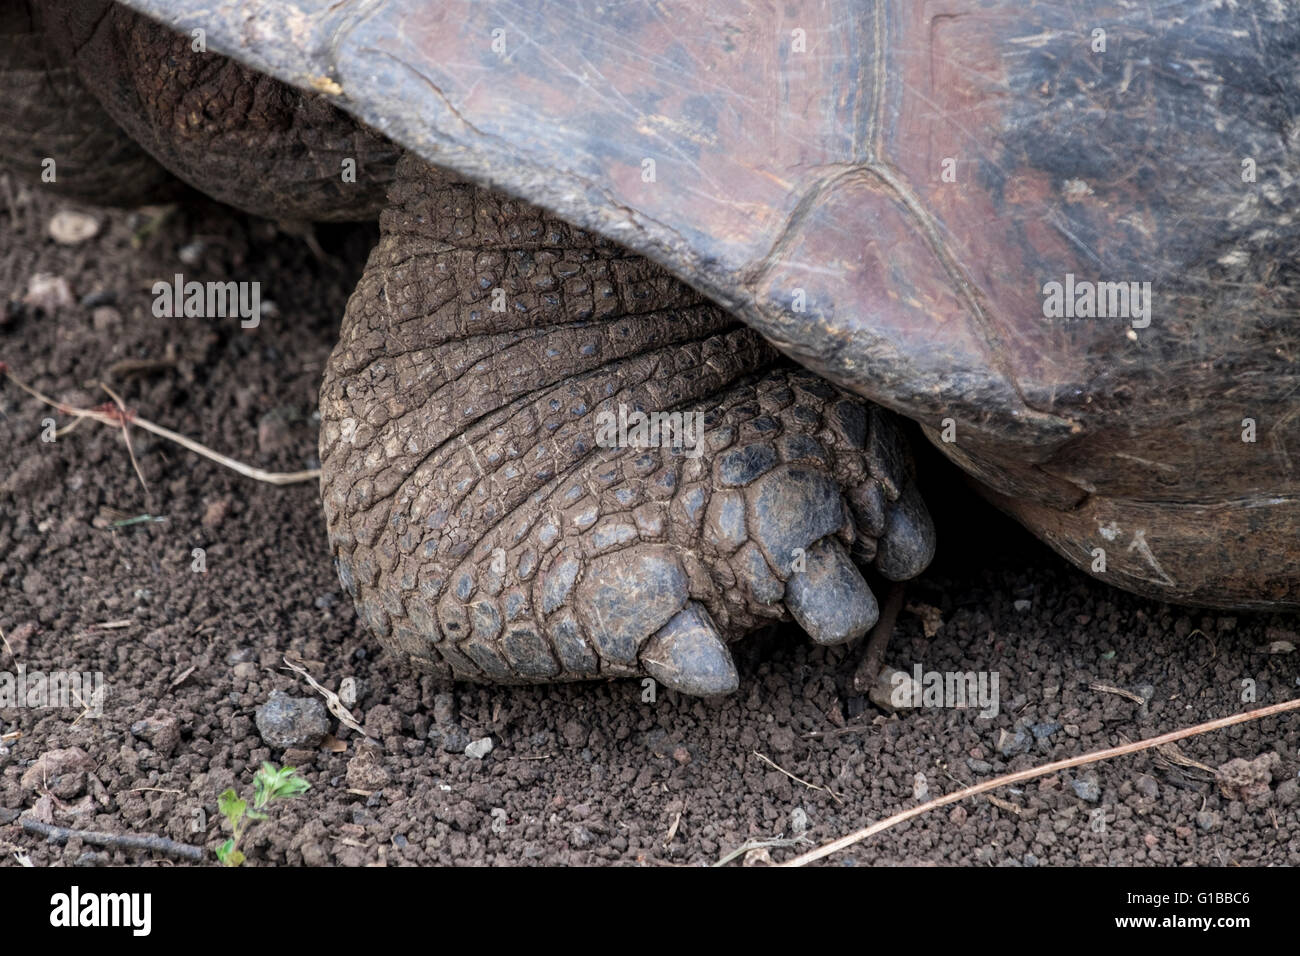 Close-up of the foot of a Galapagos Giant Tortoise Stock Photo